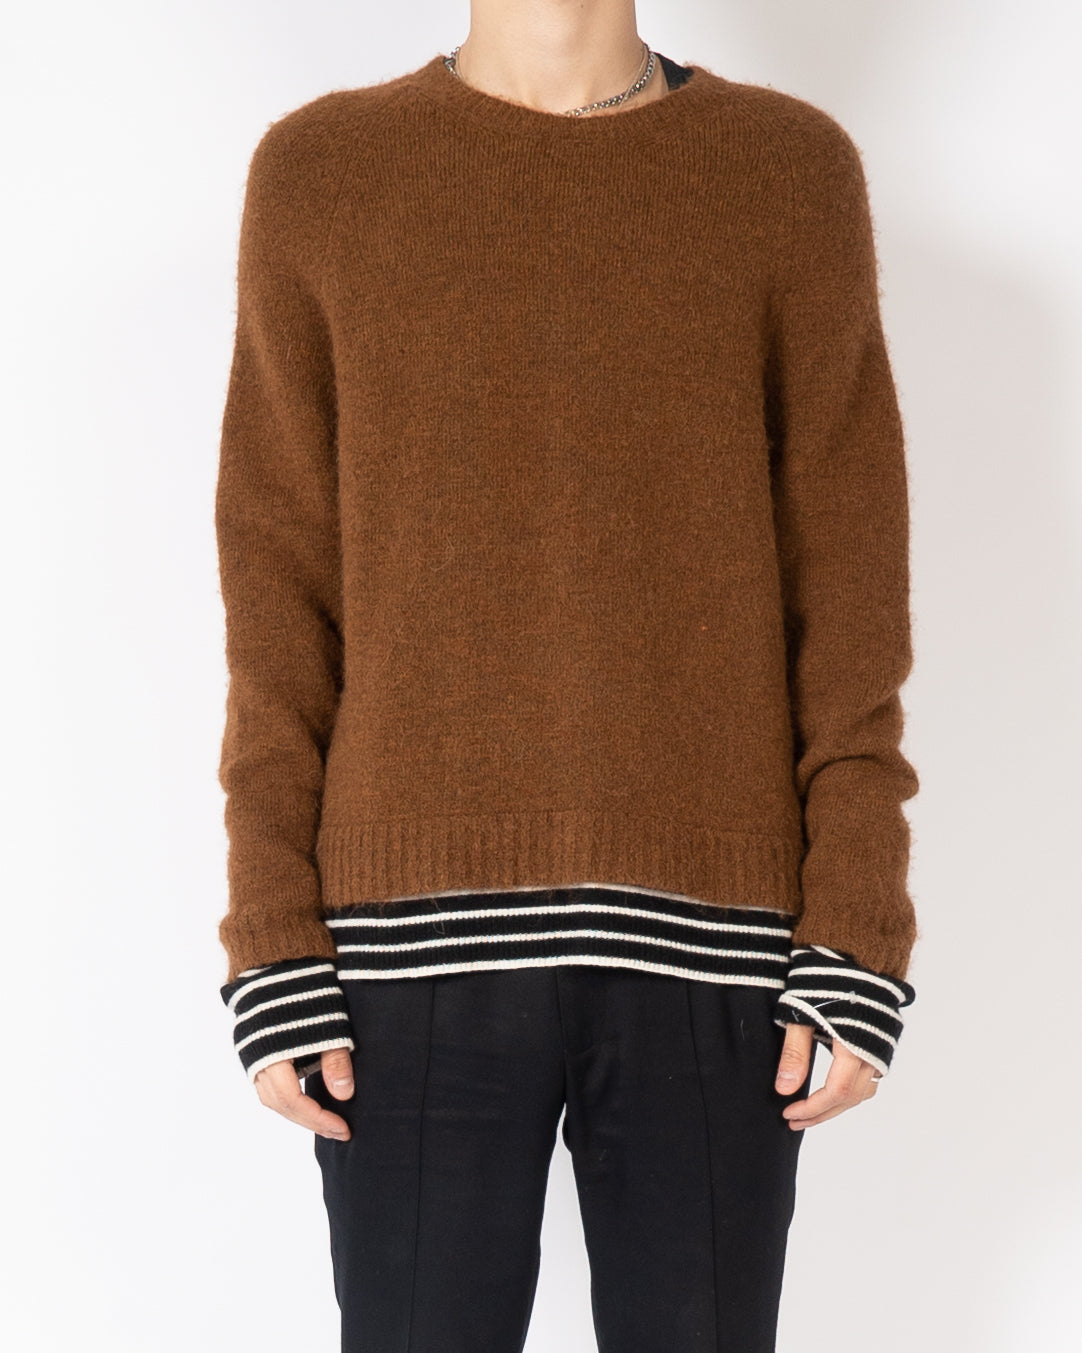 FW18 Muscari Brown Knit with Striped Contrast Sample